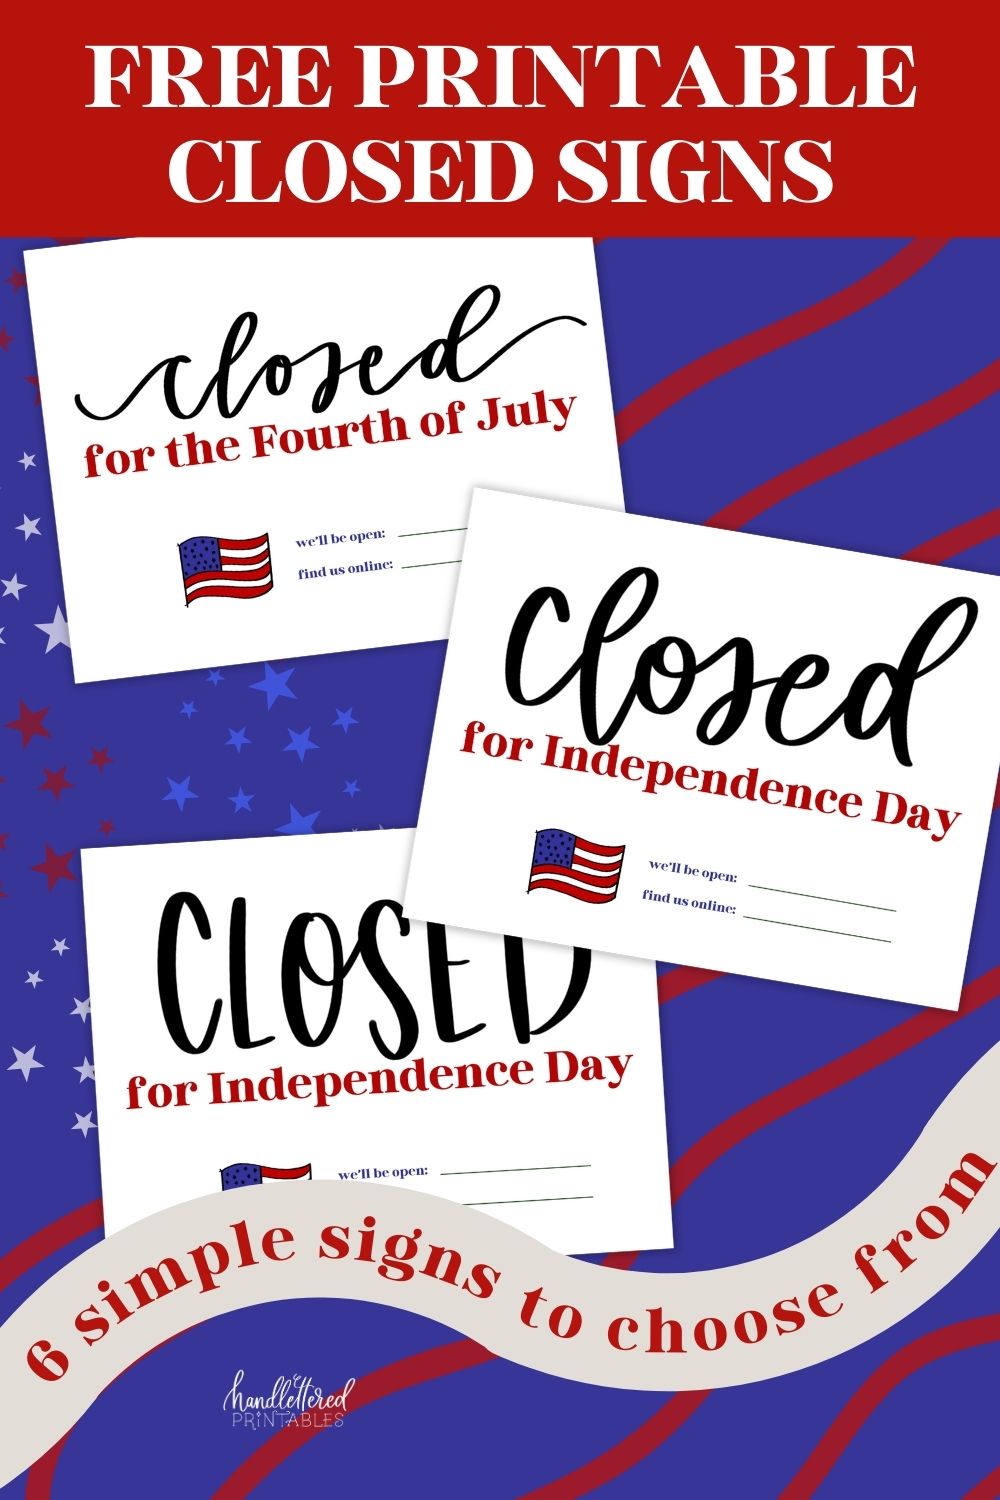 Closed for Independence Day signs shown on blue backdrop with stars and stripes signs have hand lettering, clear typography and a hand illustrated USA flag with room for holiday hours and social media tag or website. Signs read closed for the fourth of july and closed for independence day text over reads: free printable closed signs, 6 simple signs to choose from